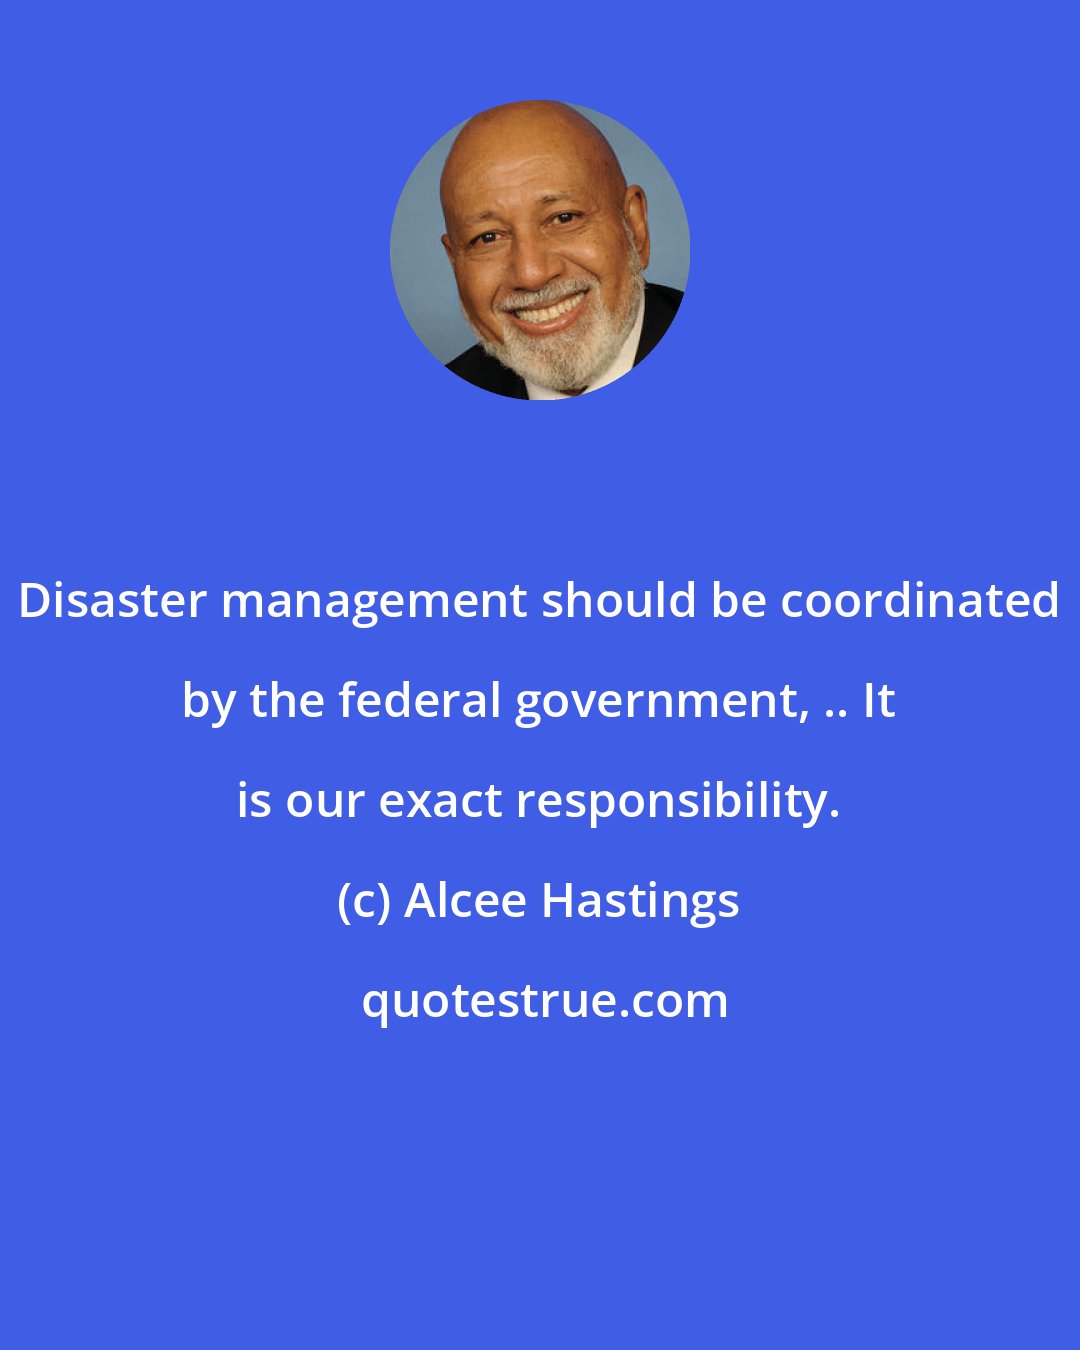 Alcee Hastings: Disaster management should be coordinated by the federal government, .. It is our exact responsibility.